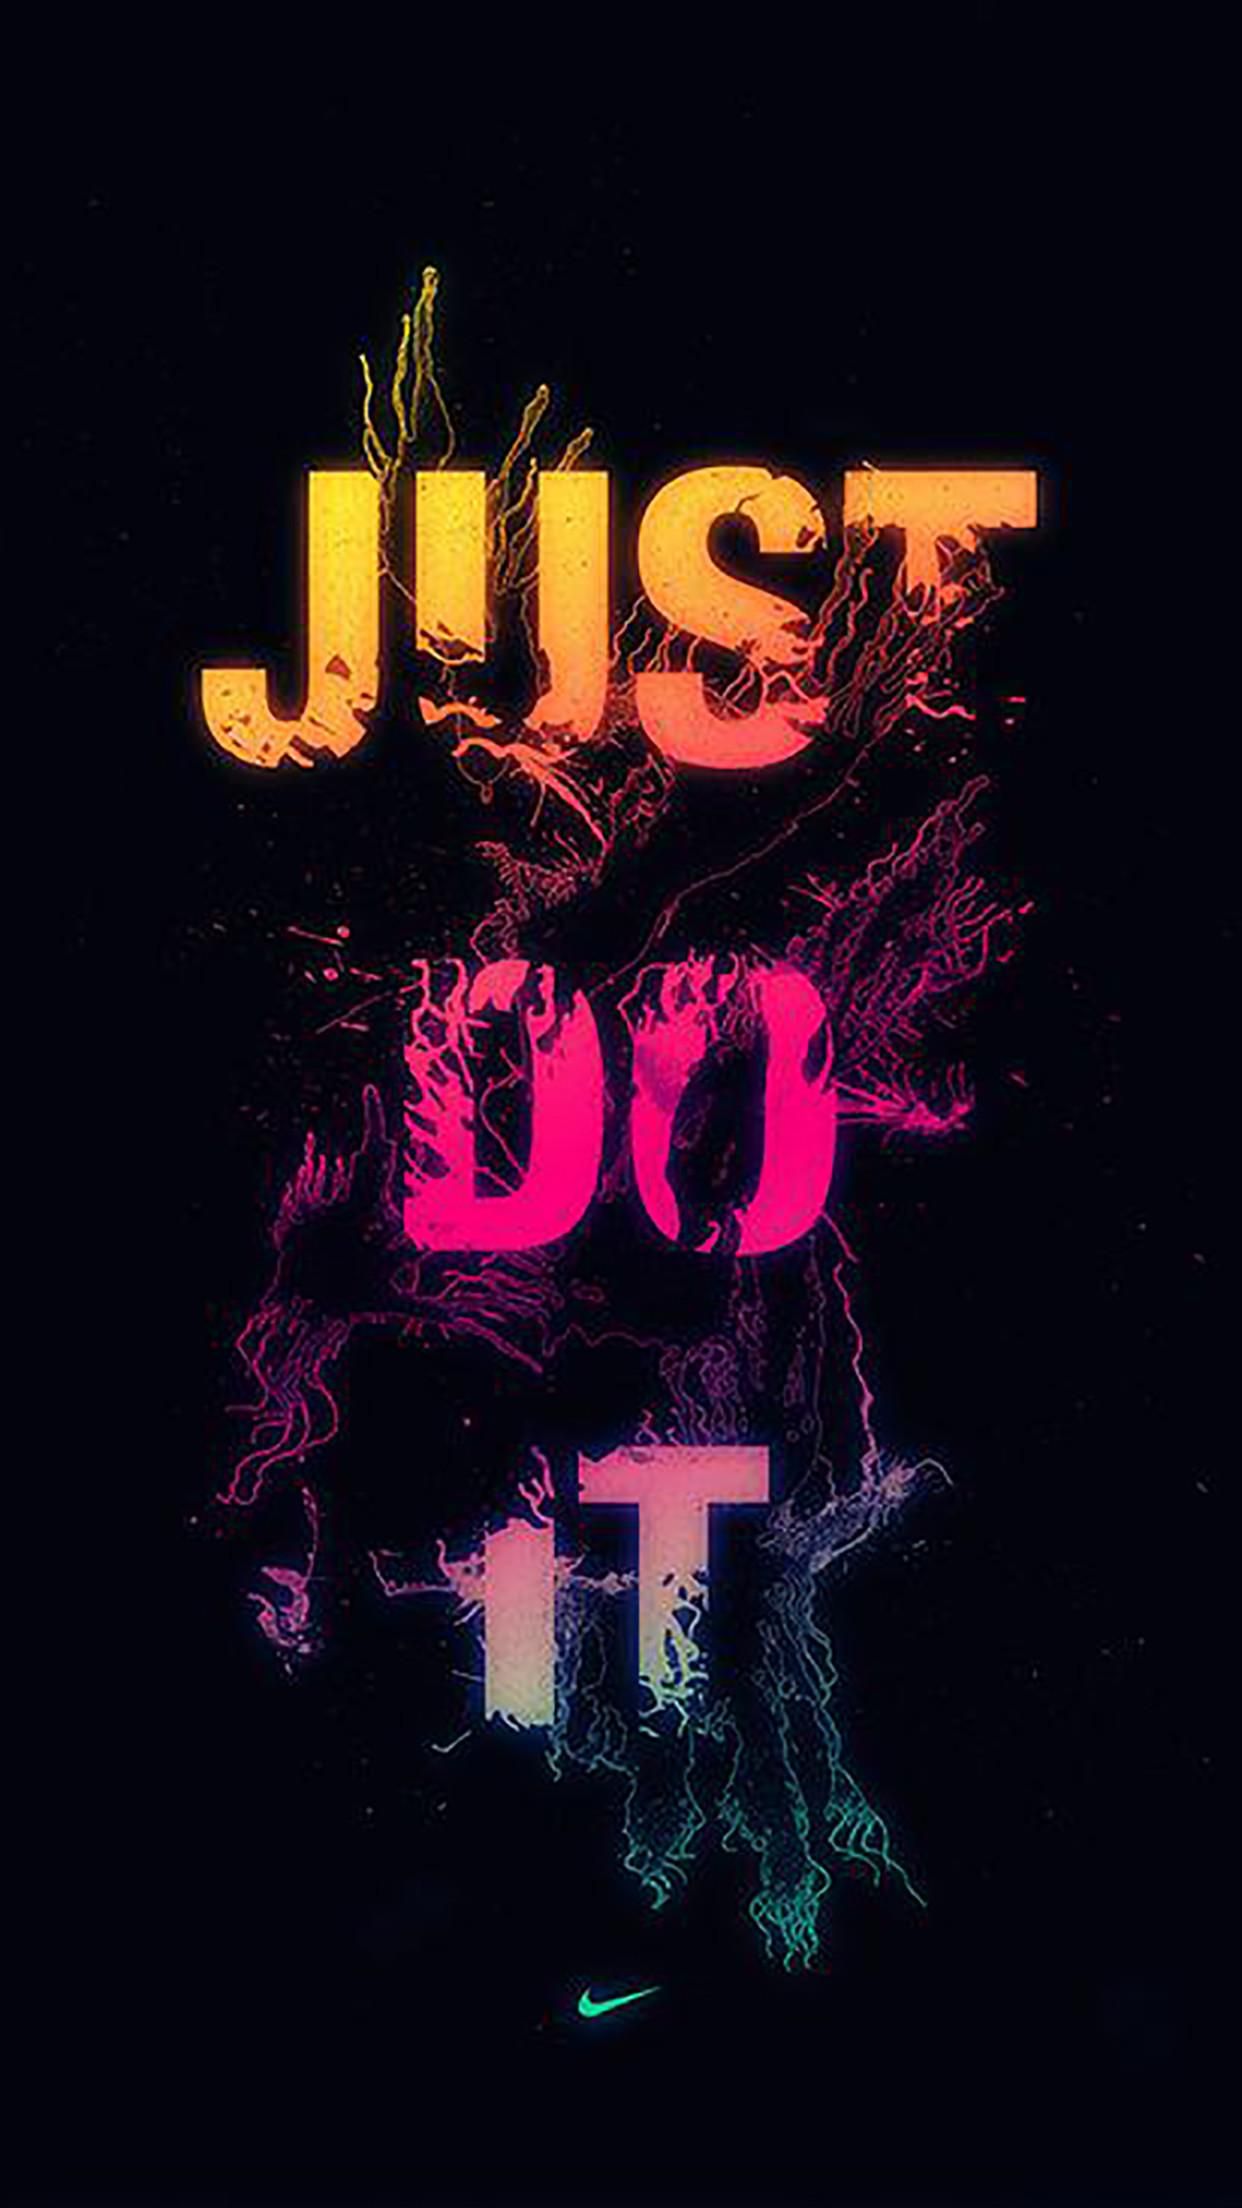 I Can Do It Wallpapers